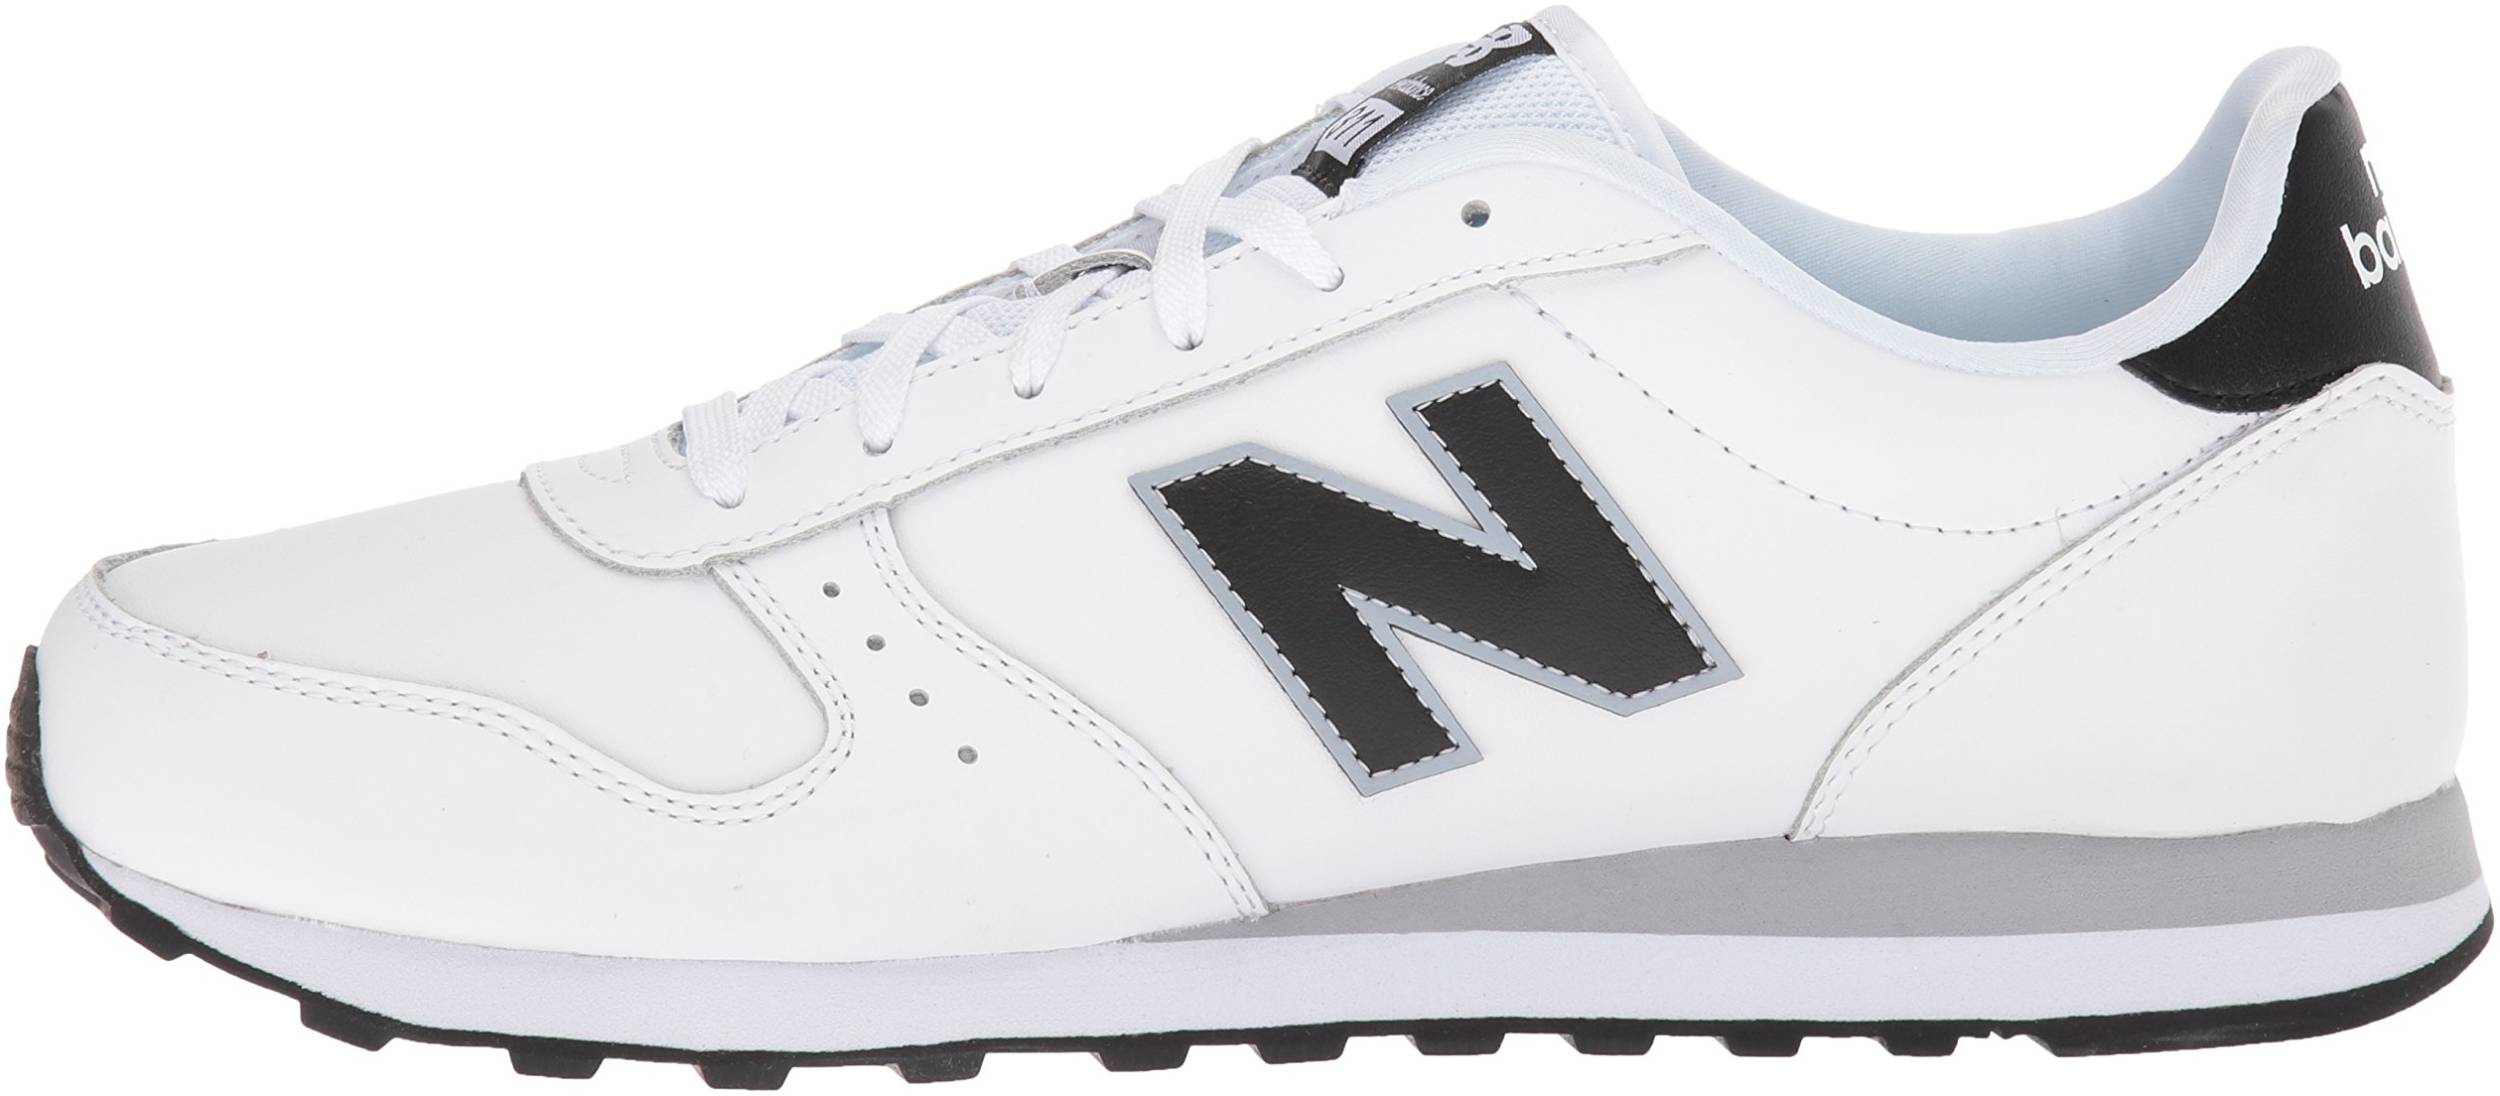 New Balance 311 sneakers in white + 